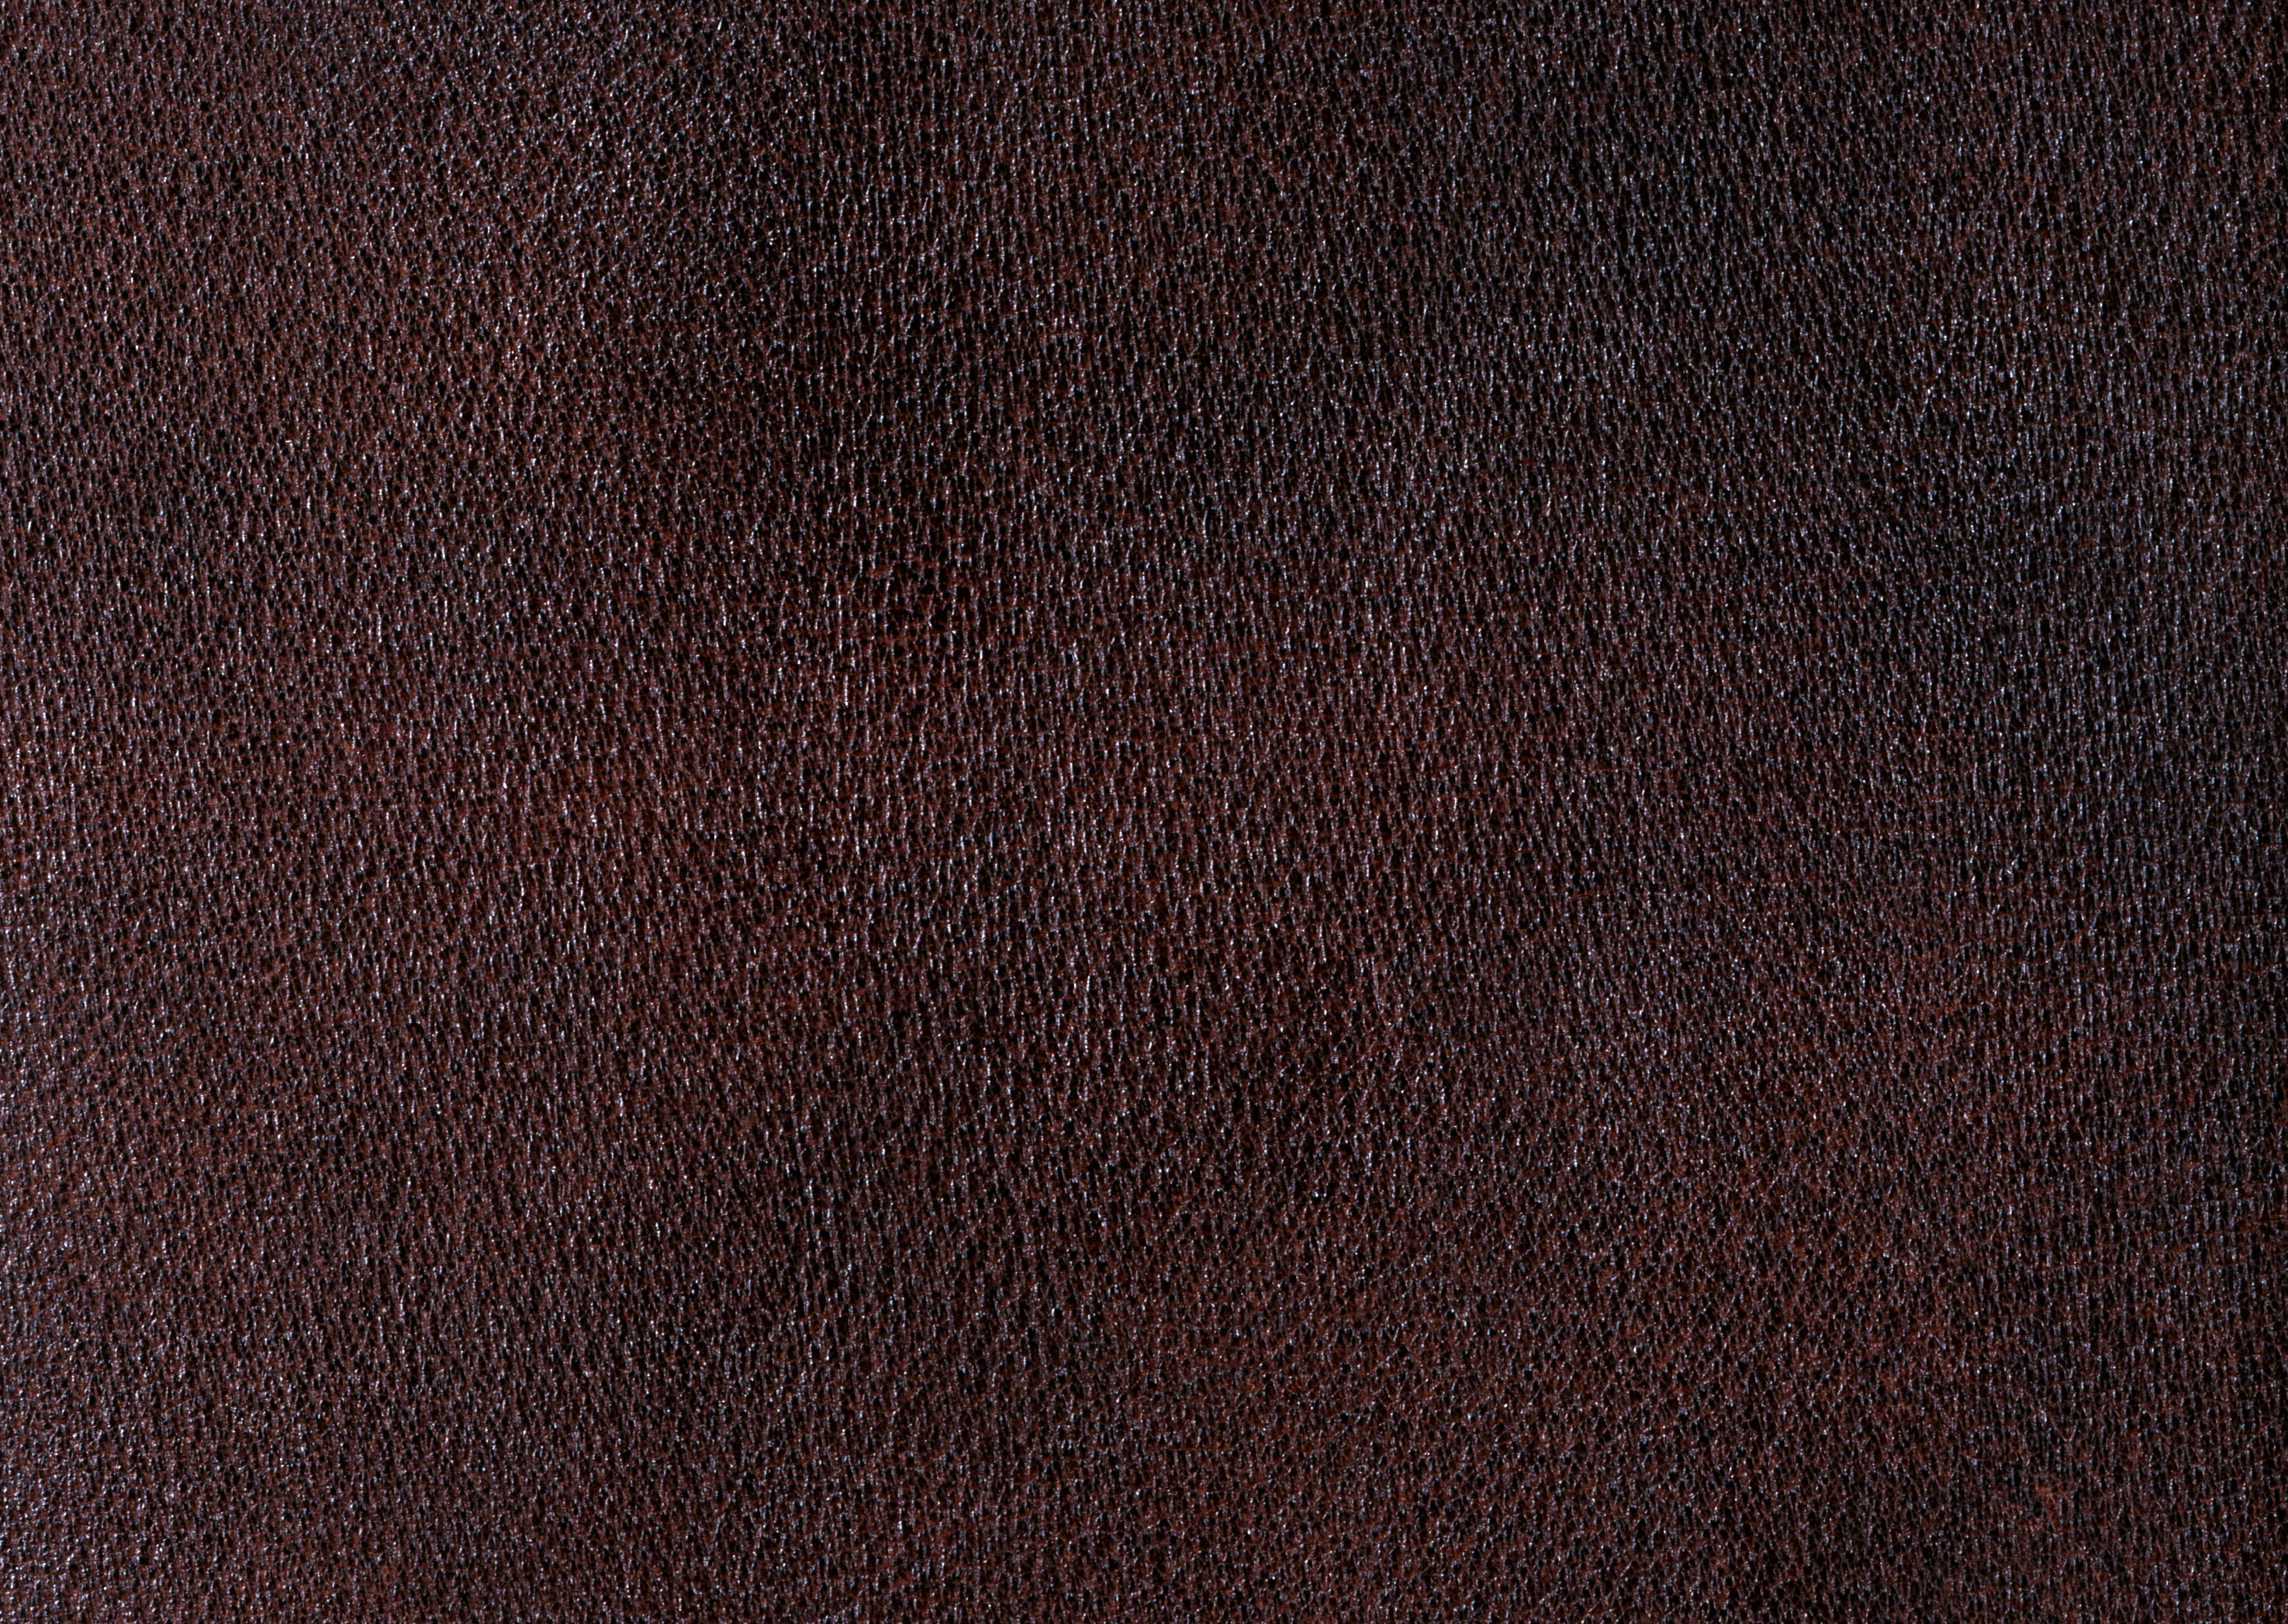 Brown leather big textures background image, free picture leather download